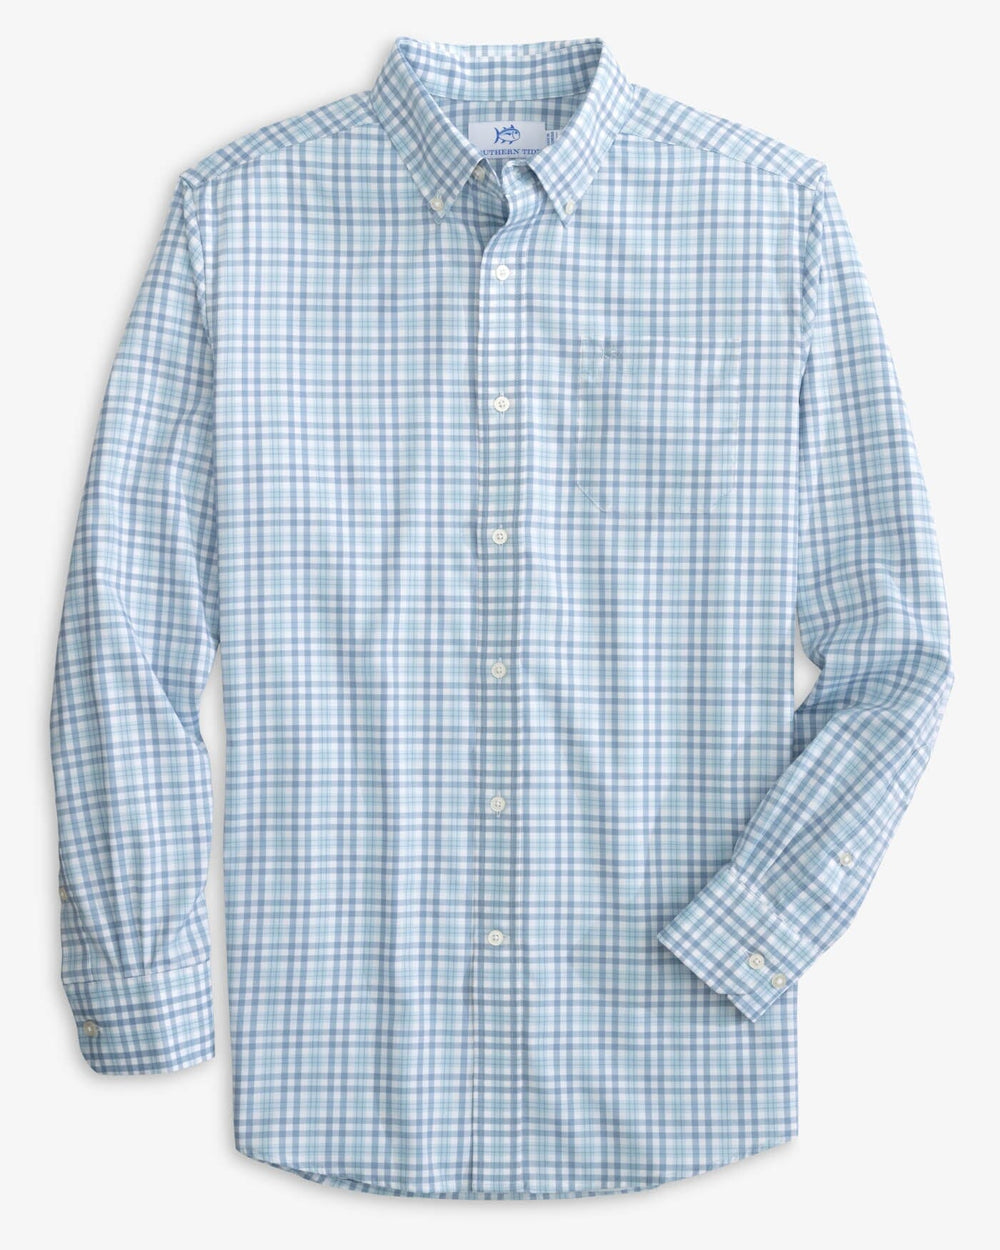 The front view of the Southern Tide Haywood brrr Plaid Intercoastal Sport Shirts by Southern Tide - Dream Blue